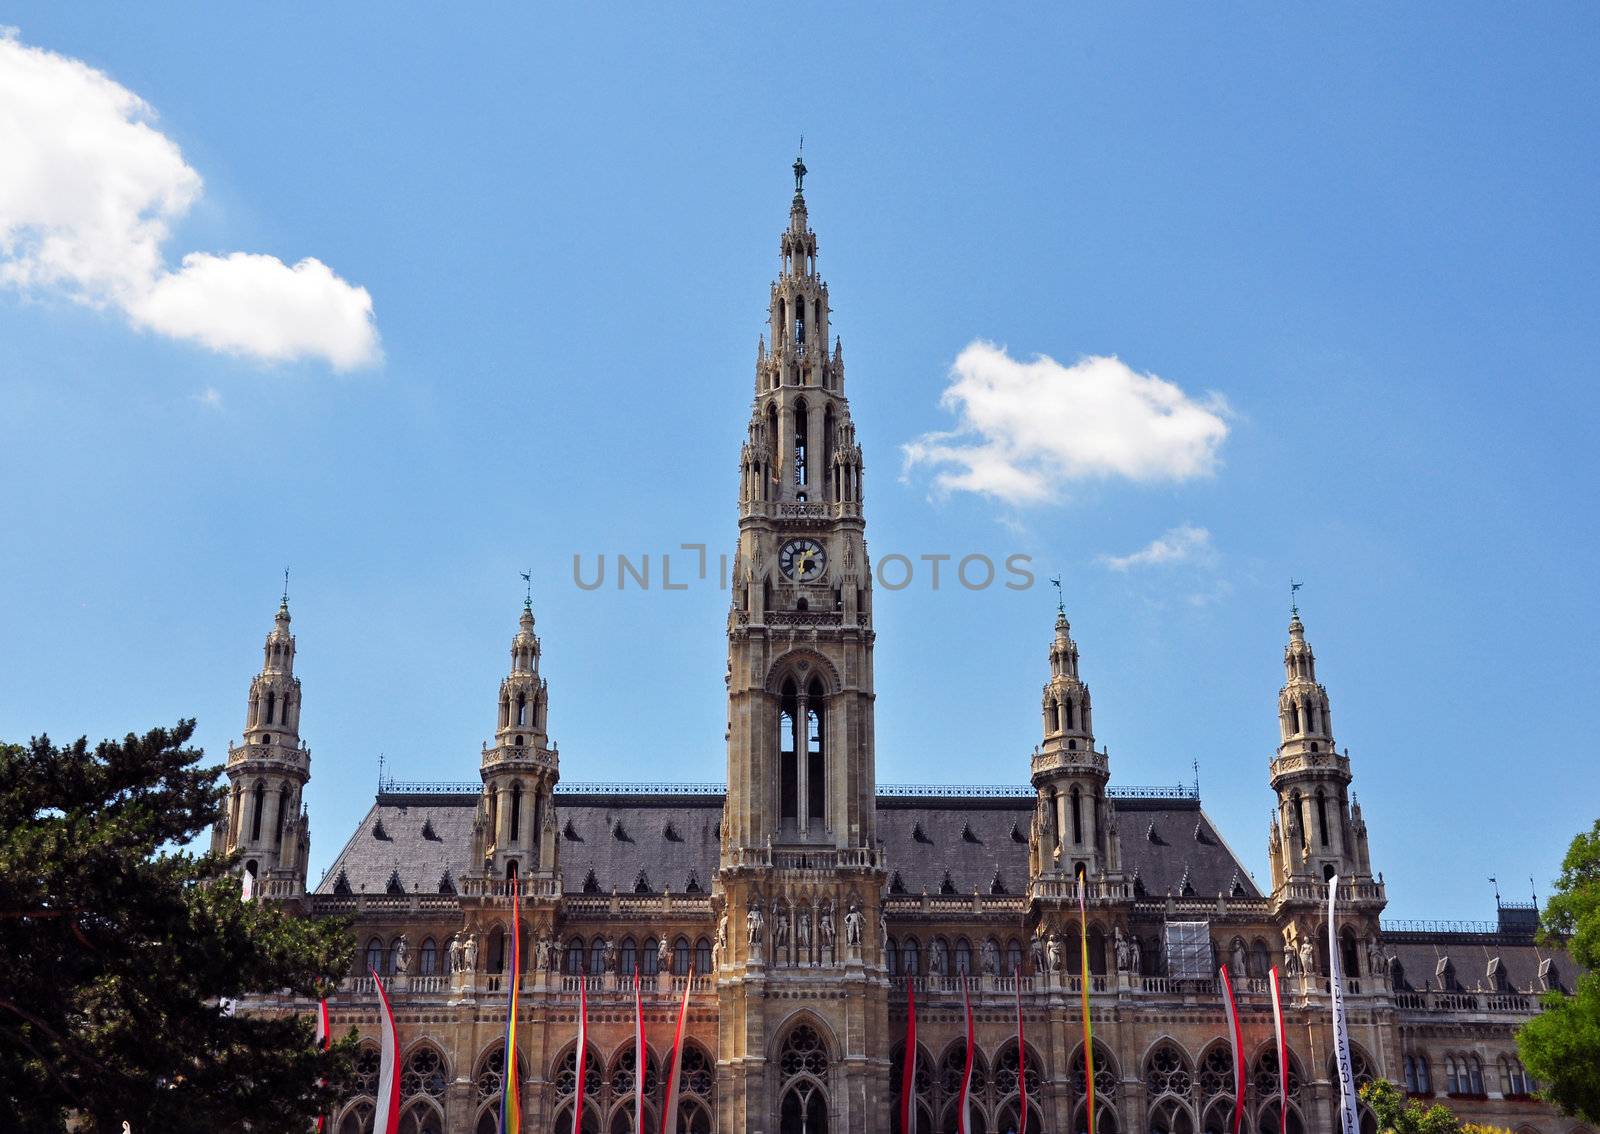 Town hall (Rathaus) of Vienna by rbiedermann